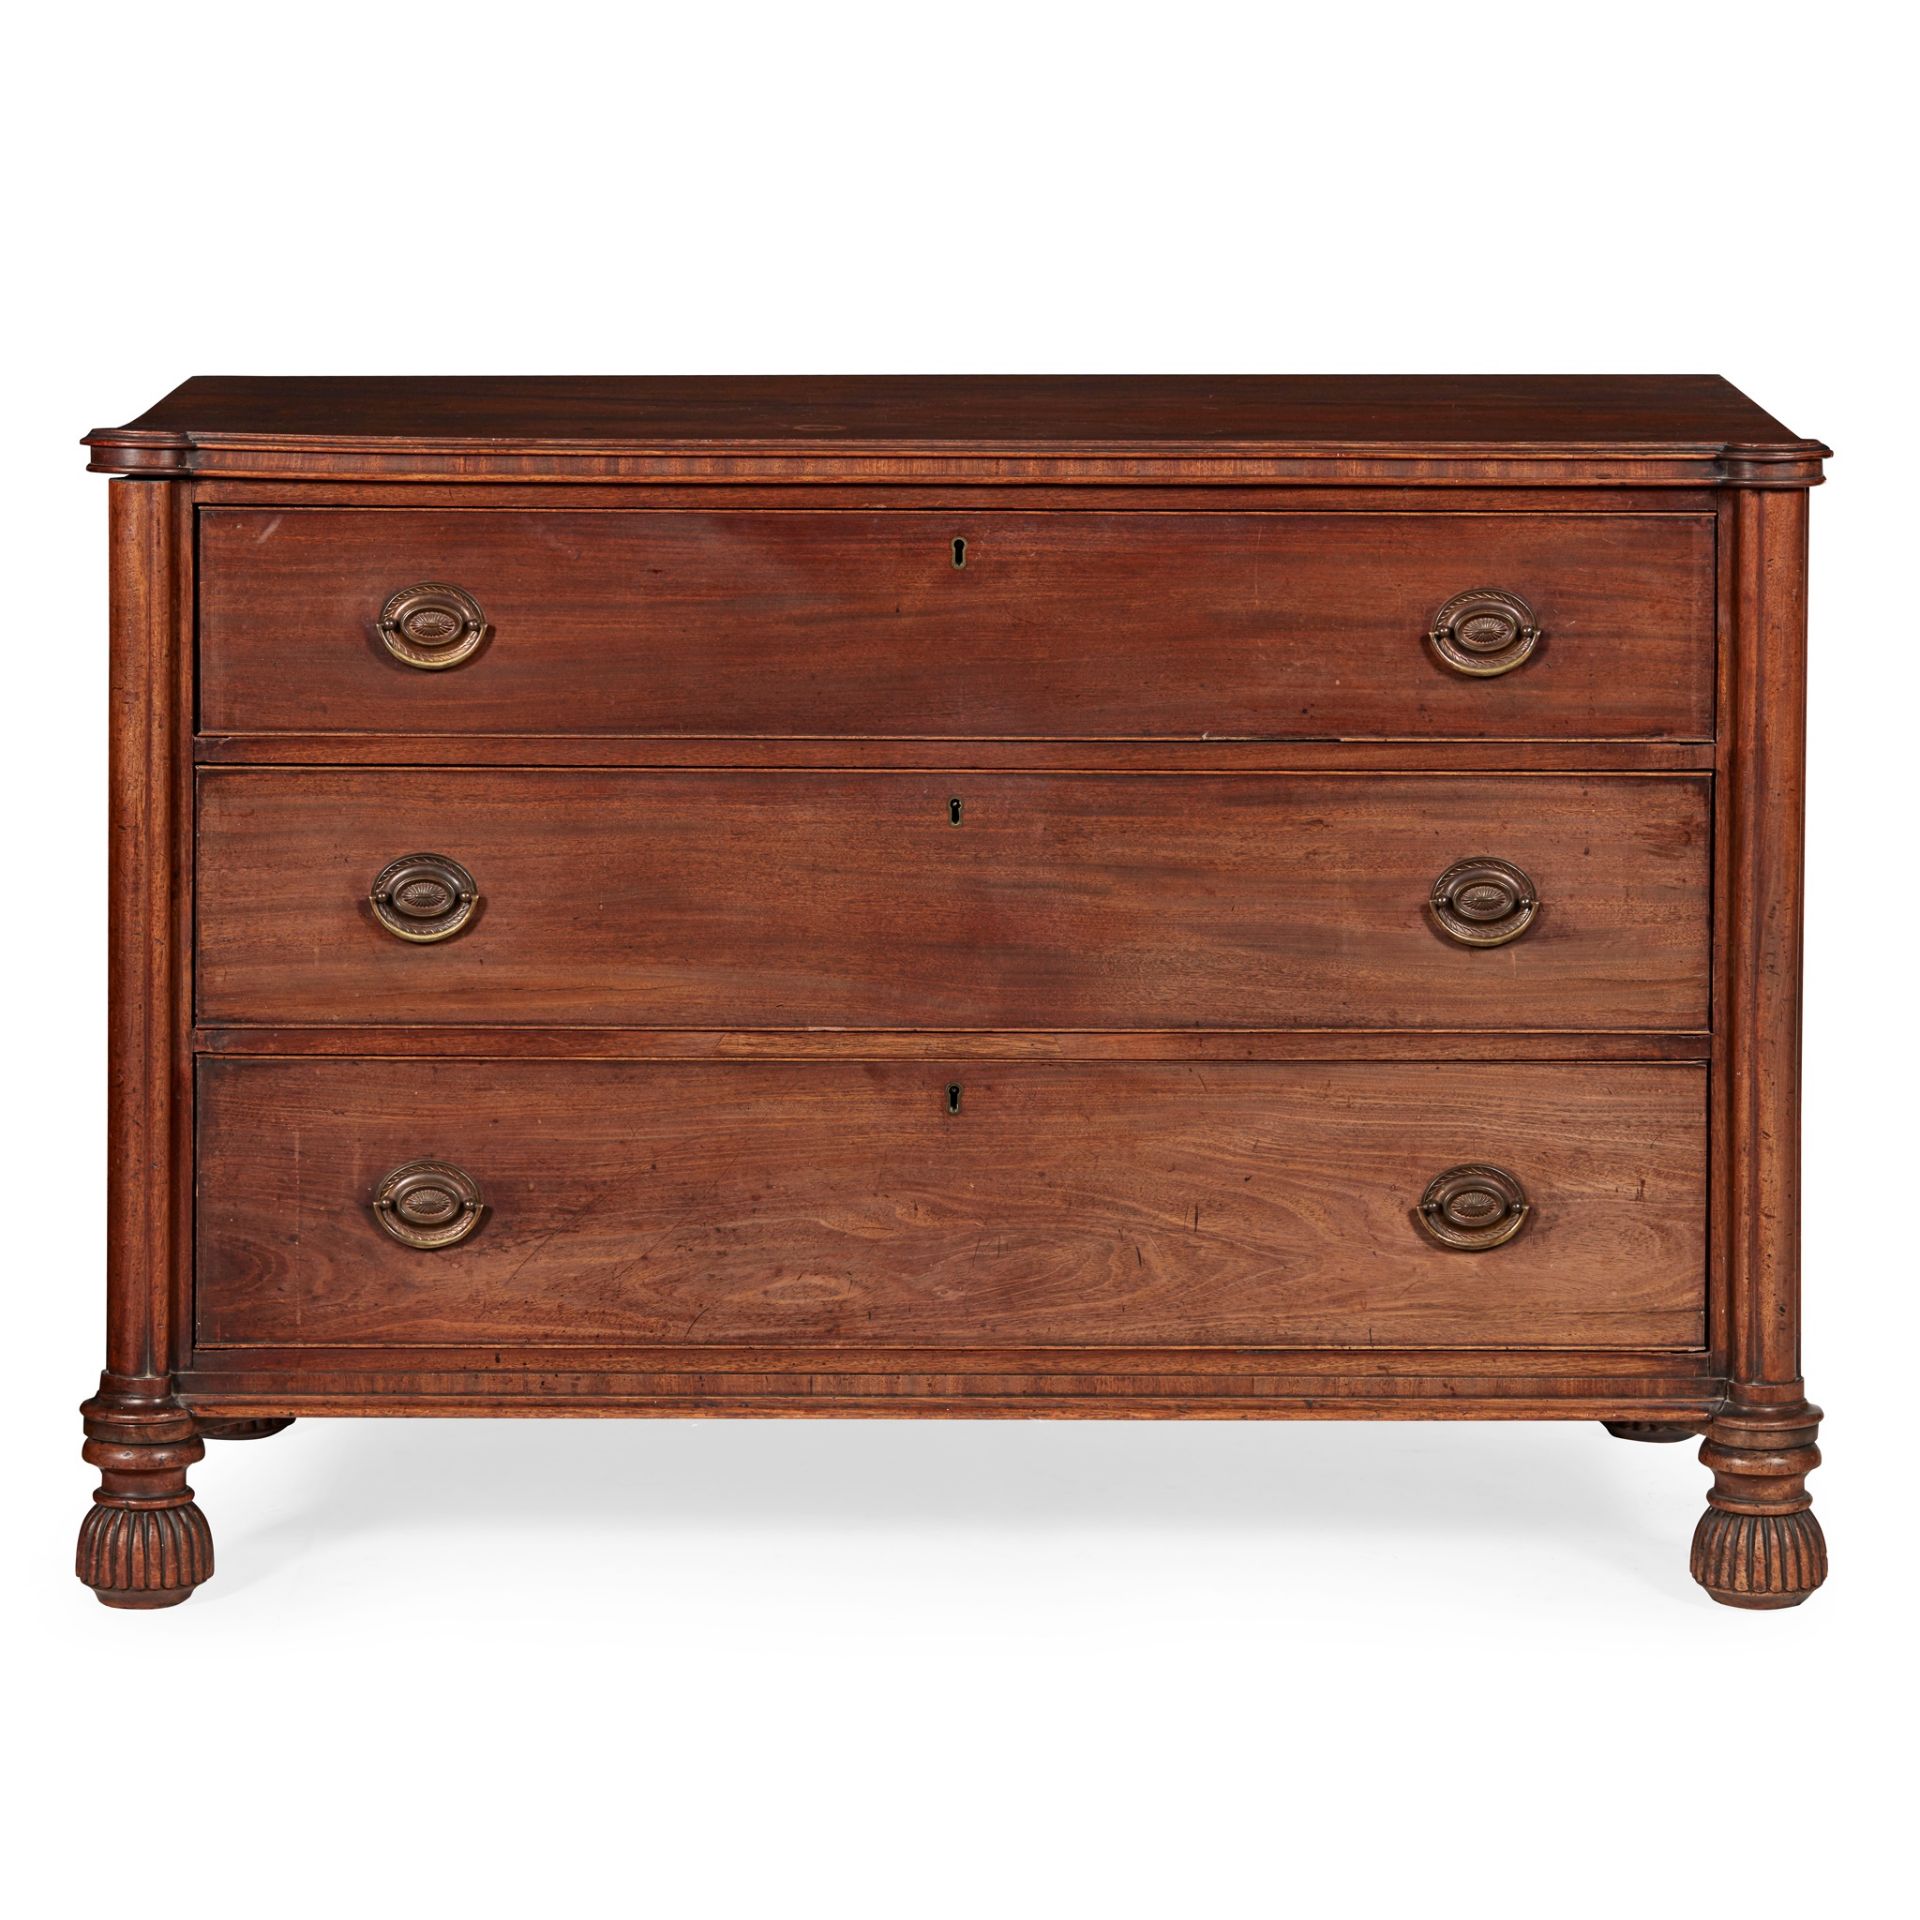 REGENCY MAHOGANY CHEST OF DRAWERS EARLY 19TH CENTURY